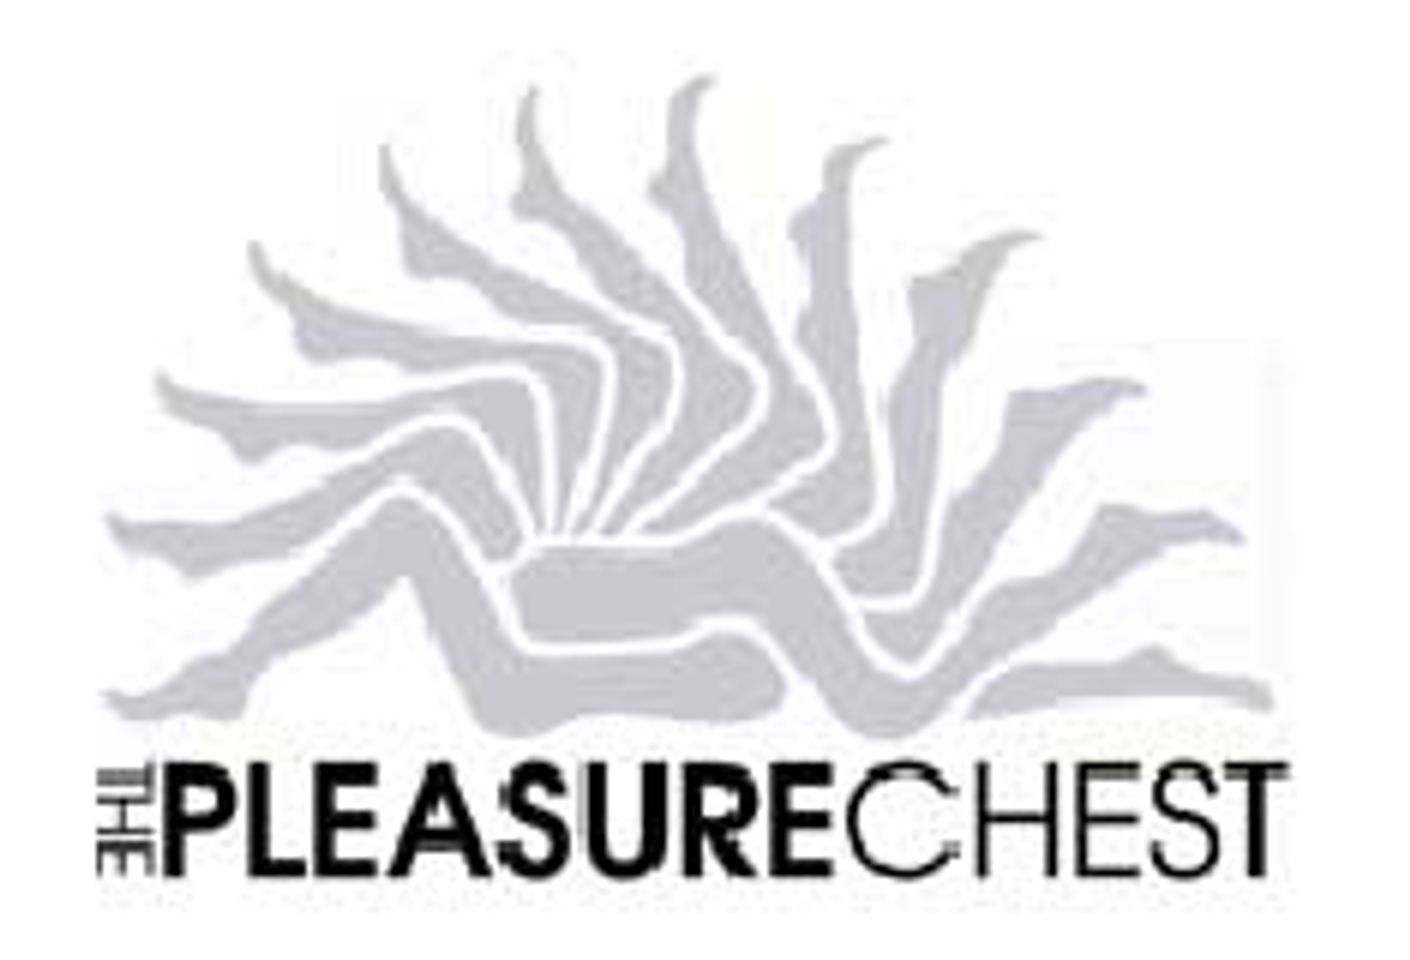 Pleasure Chest to Donate 15 Percent of Sales on January 16 to Haiti Aid Efforts